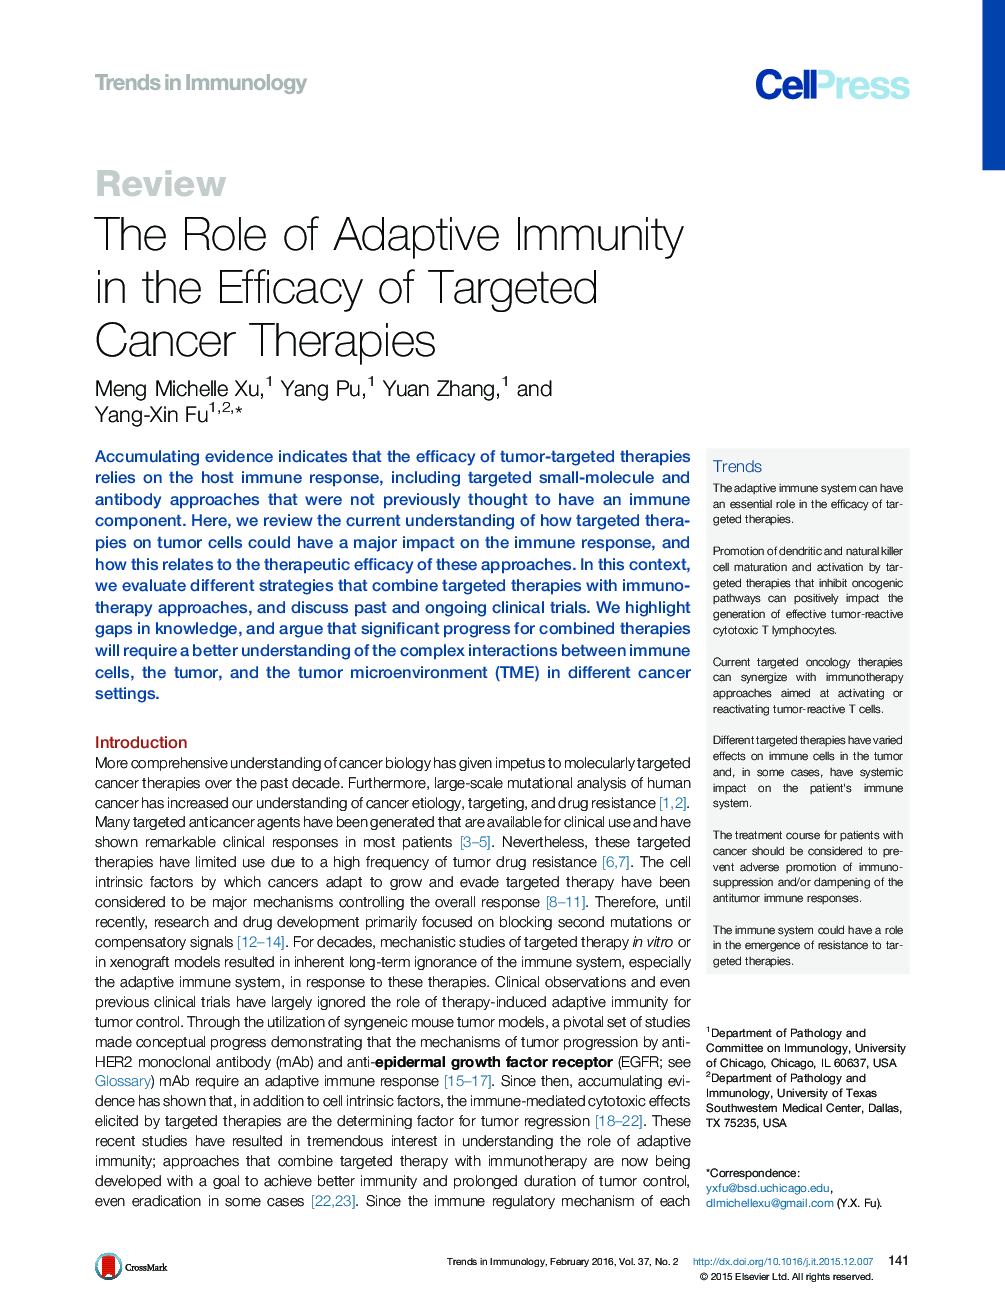 The Role of Adaptive Immunity in the Efficacy of Targeted Cancer Therapies